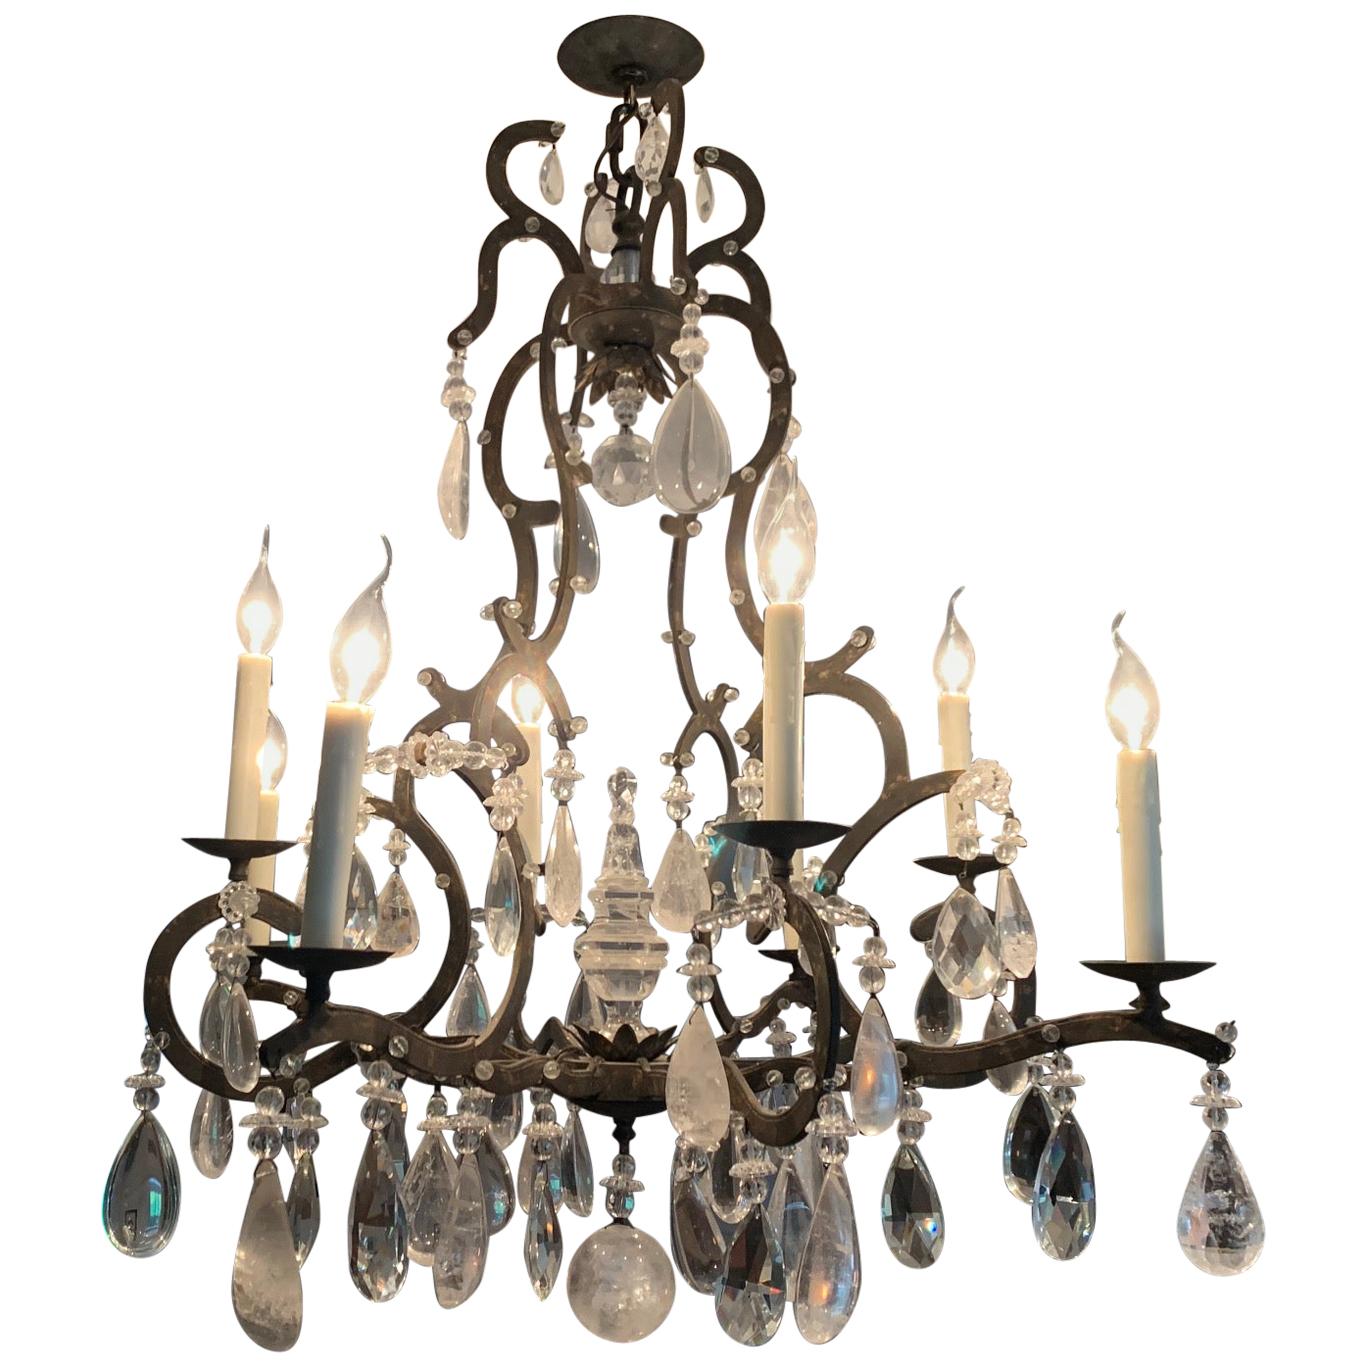 Impressive Farmhouse Chic Large Wrought Iron and Crystal Adorned Chandelier For Sale